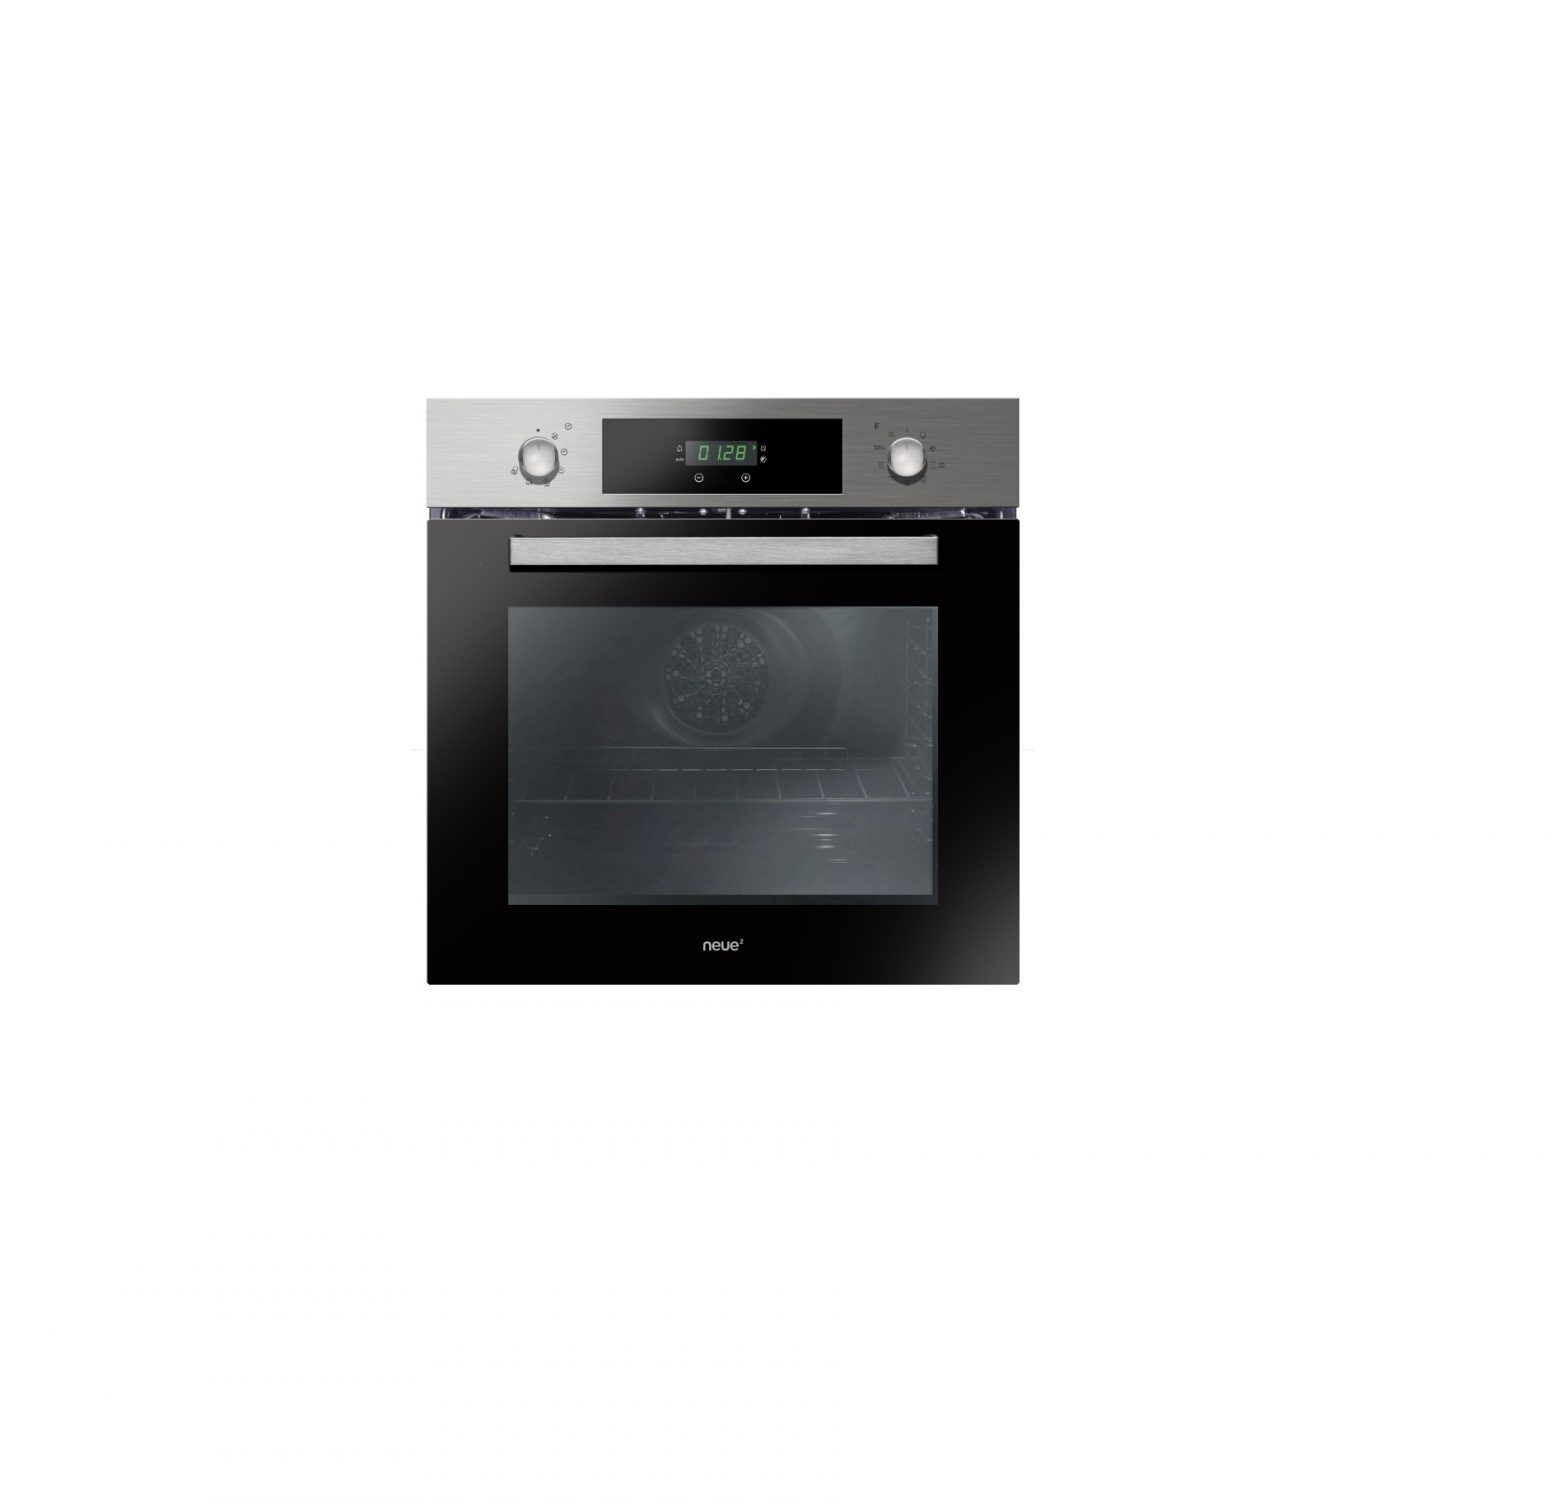 NEUE FNPK606X Oven Integrated Single Pyrolytic Multifunction Oven Stainless Steel Instructions